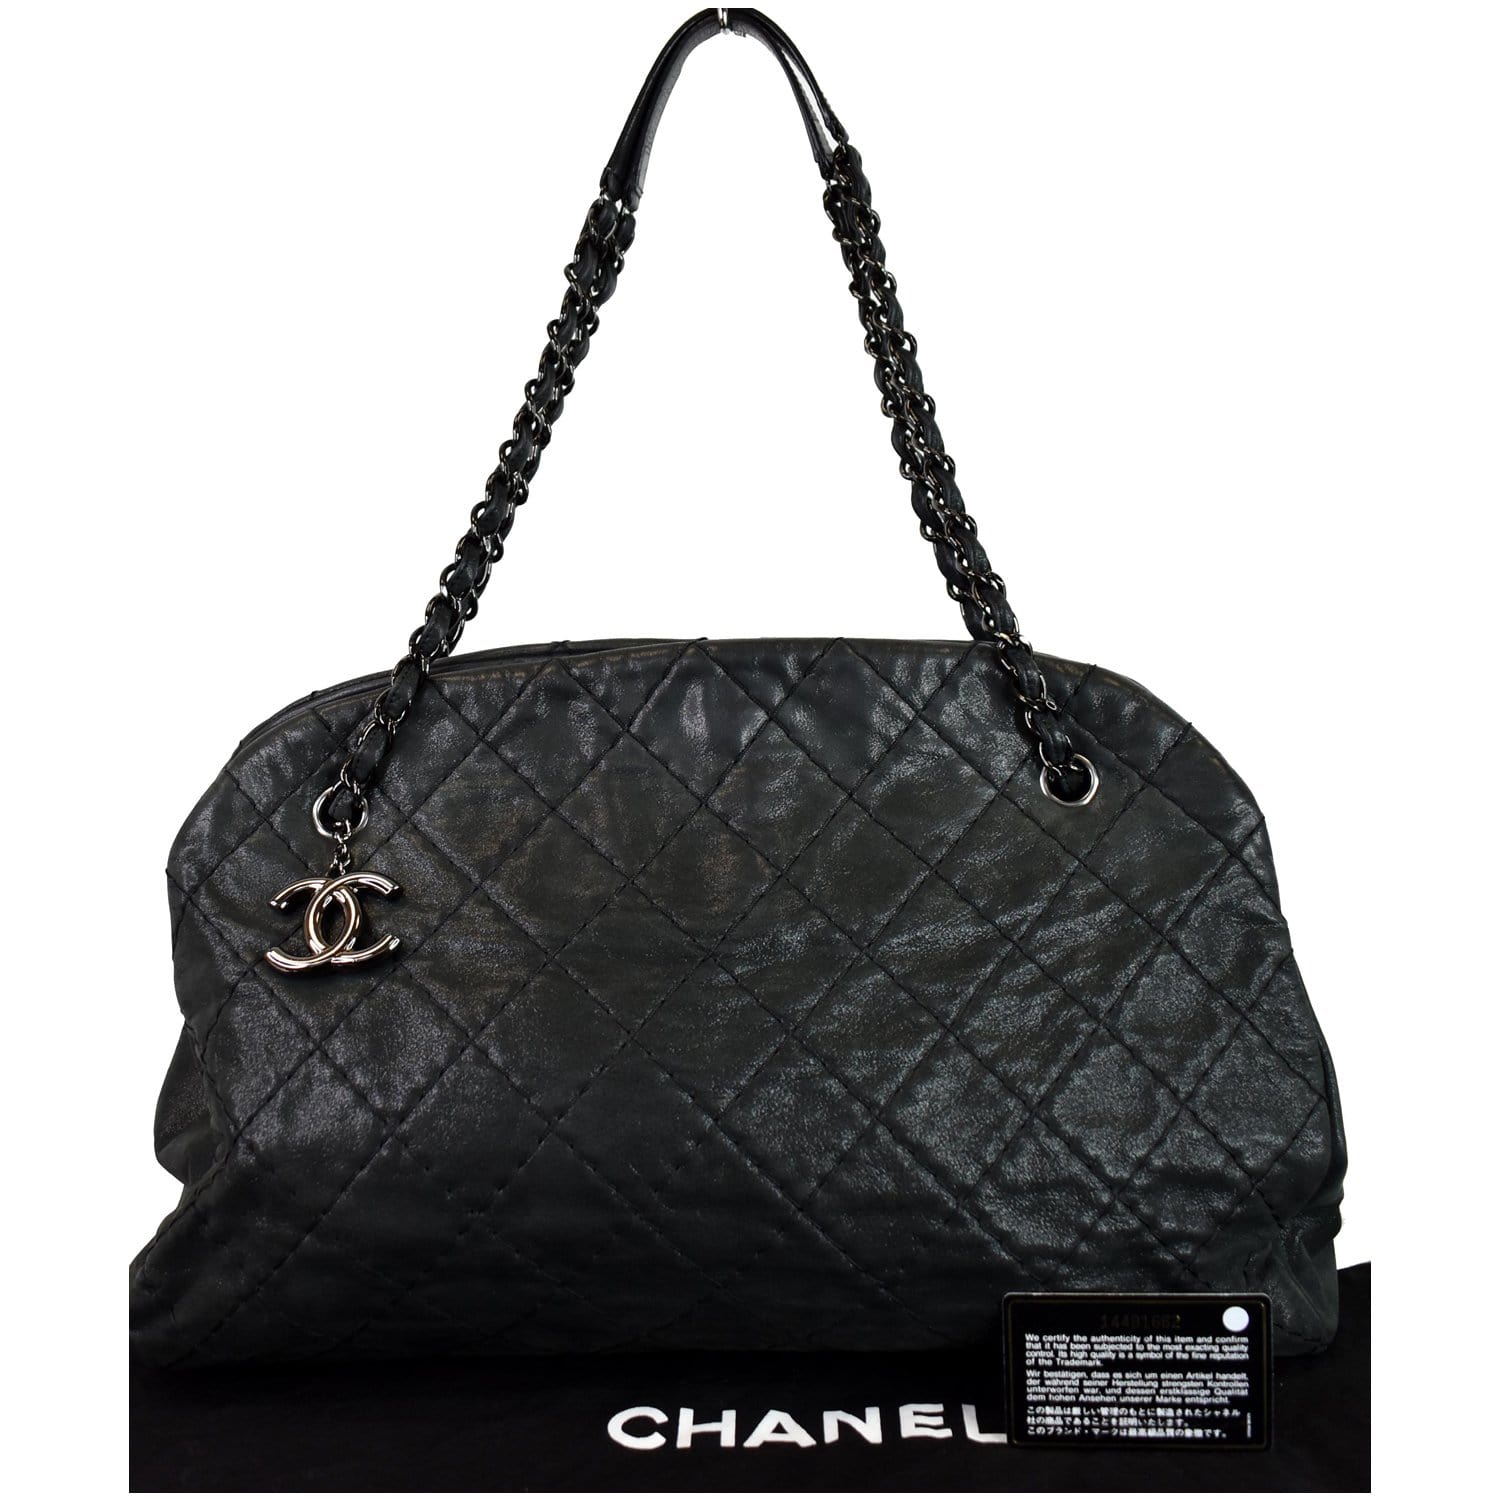 Chanel Just Mademoiselle Maxi Iridescent Leather Bowling Bag